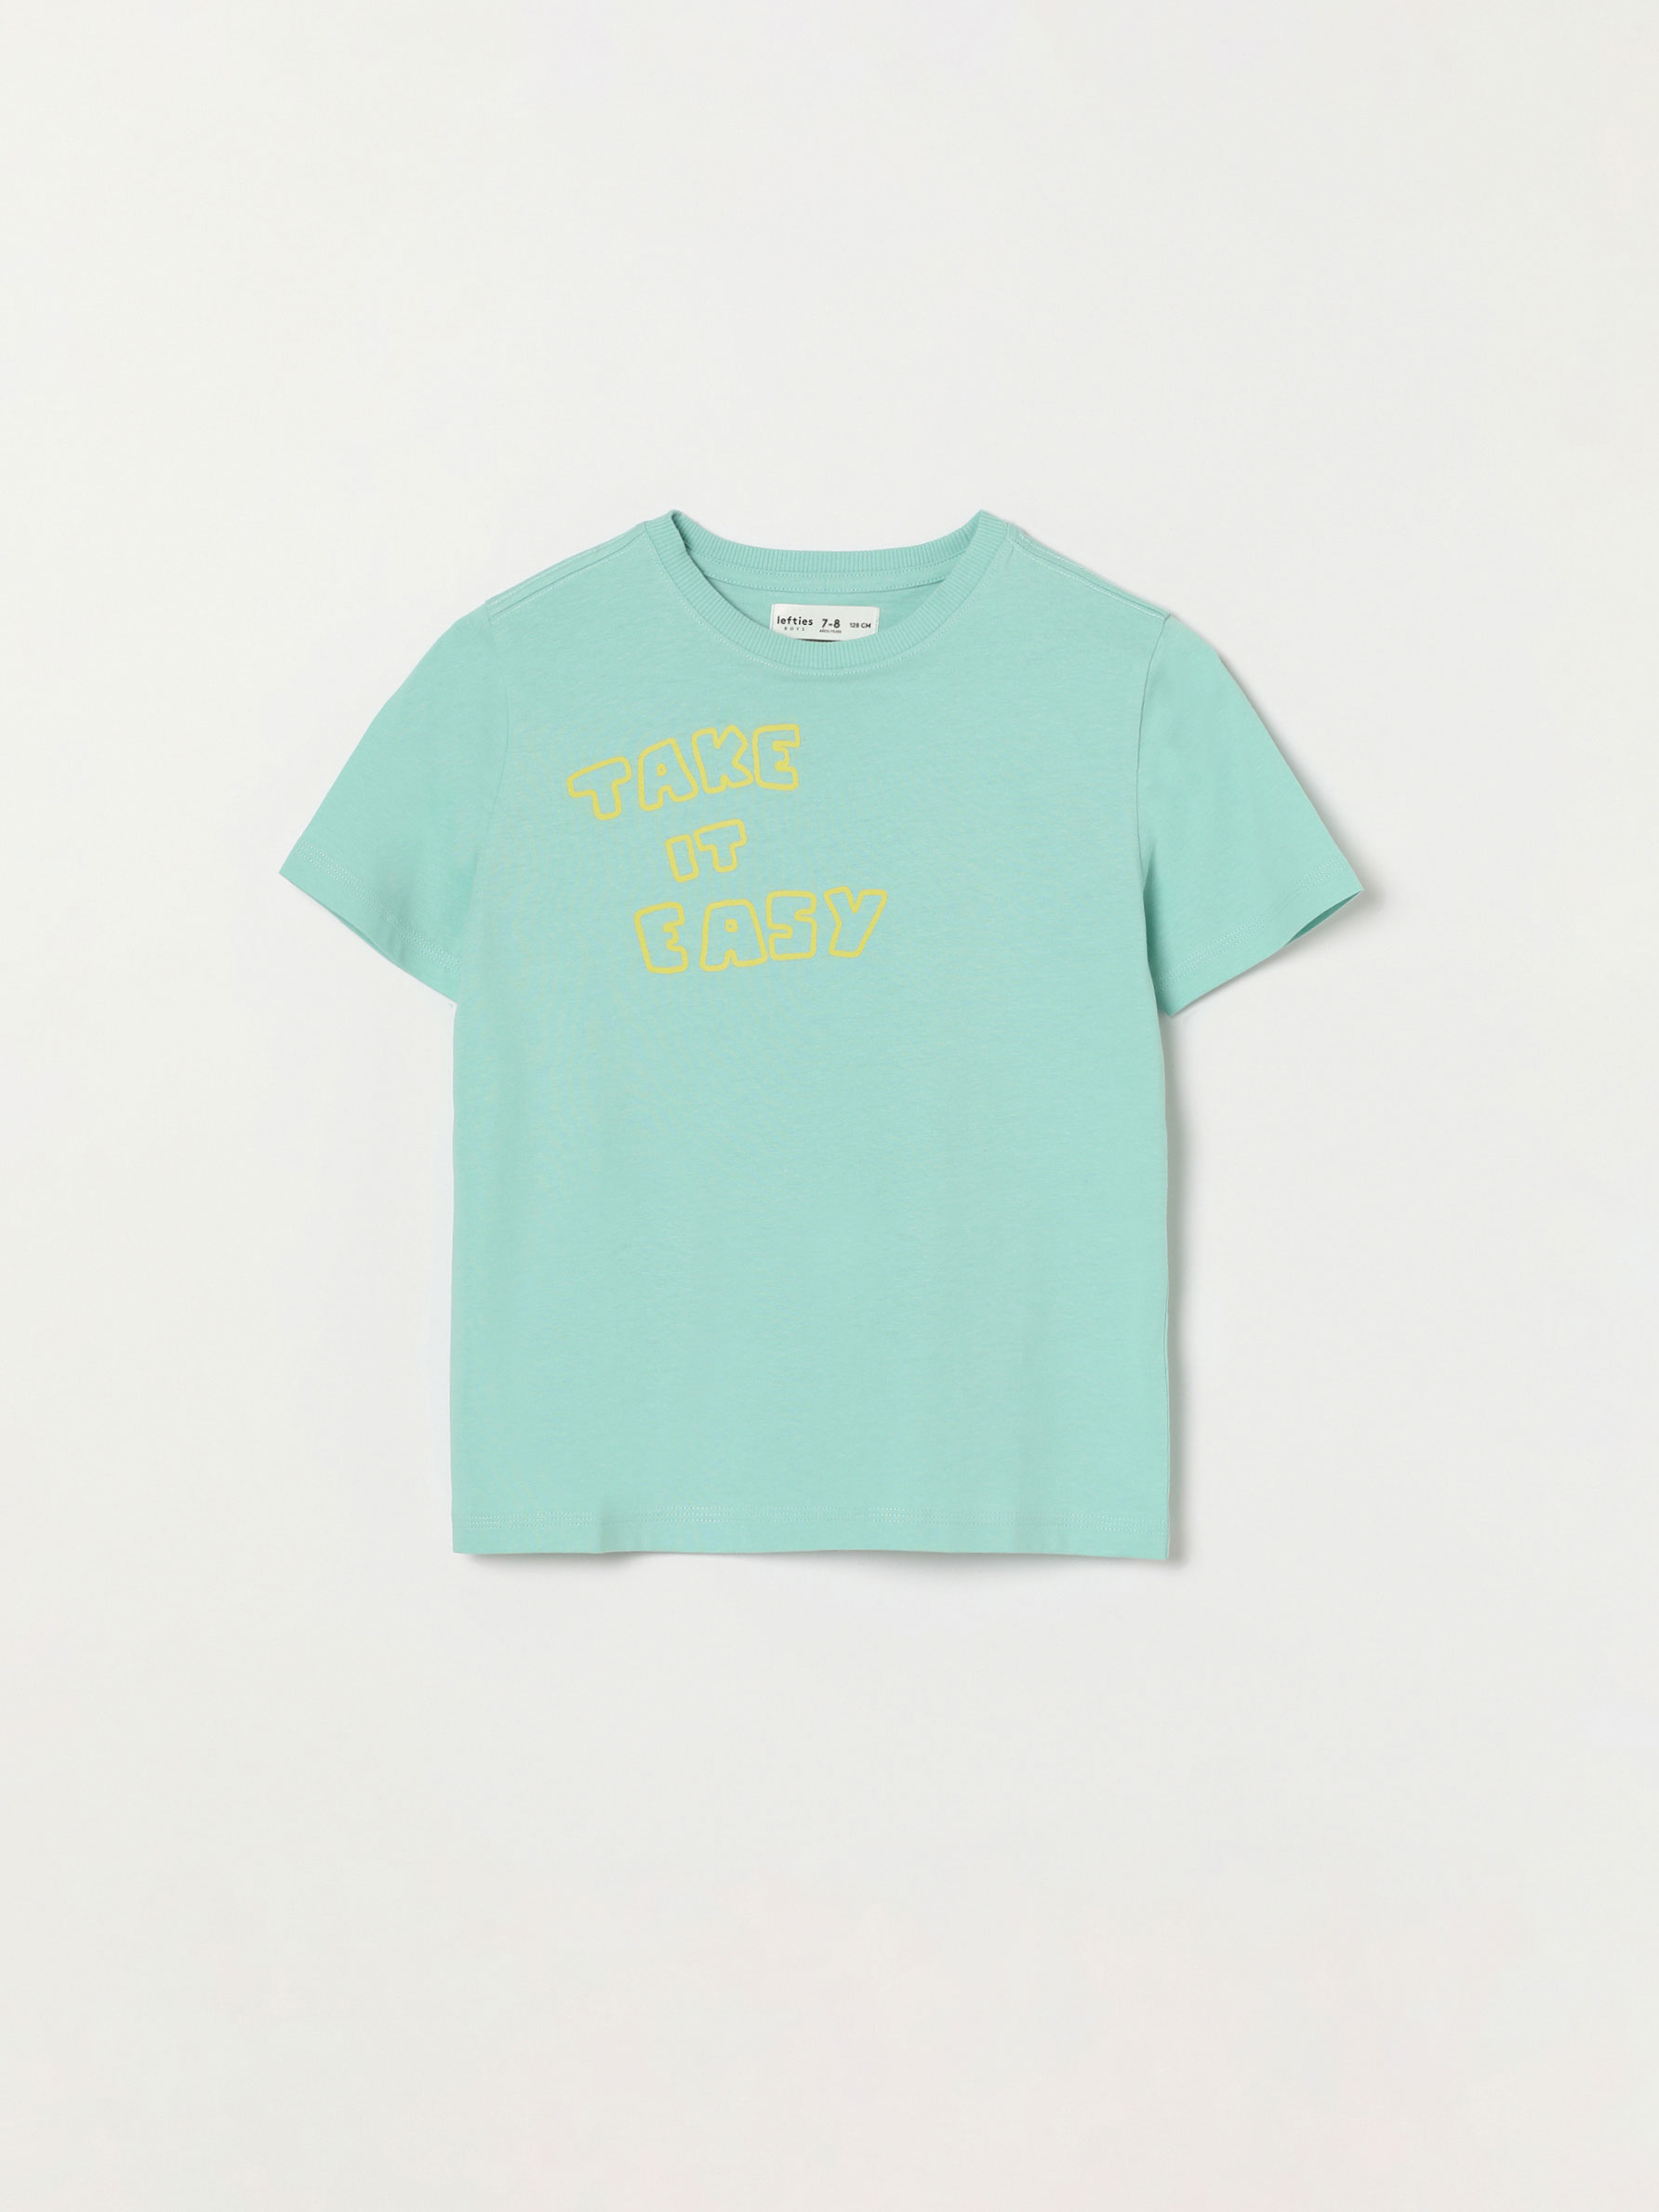 T-shirt PEPE JEANS 9-10 years white T-shirts  Pepe Jeans Kids Kids Boys Pepe Jeans Clothing Pepe Jeans Kids T-shirts & Polos Pepe Jeans Kids T-shirts  Pepe Jeans Kids 